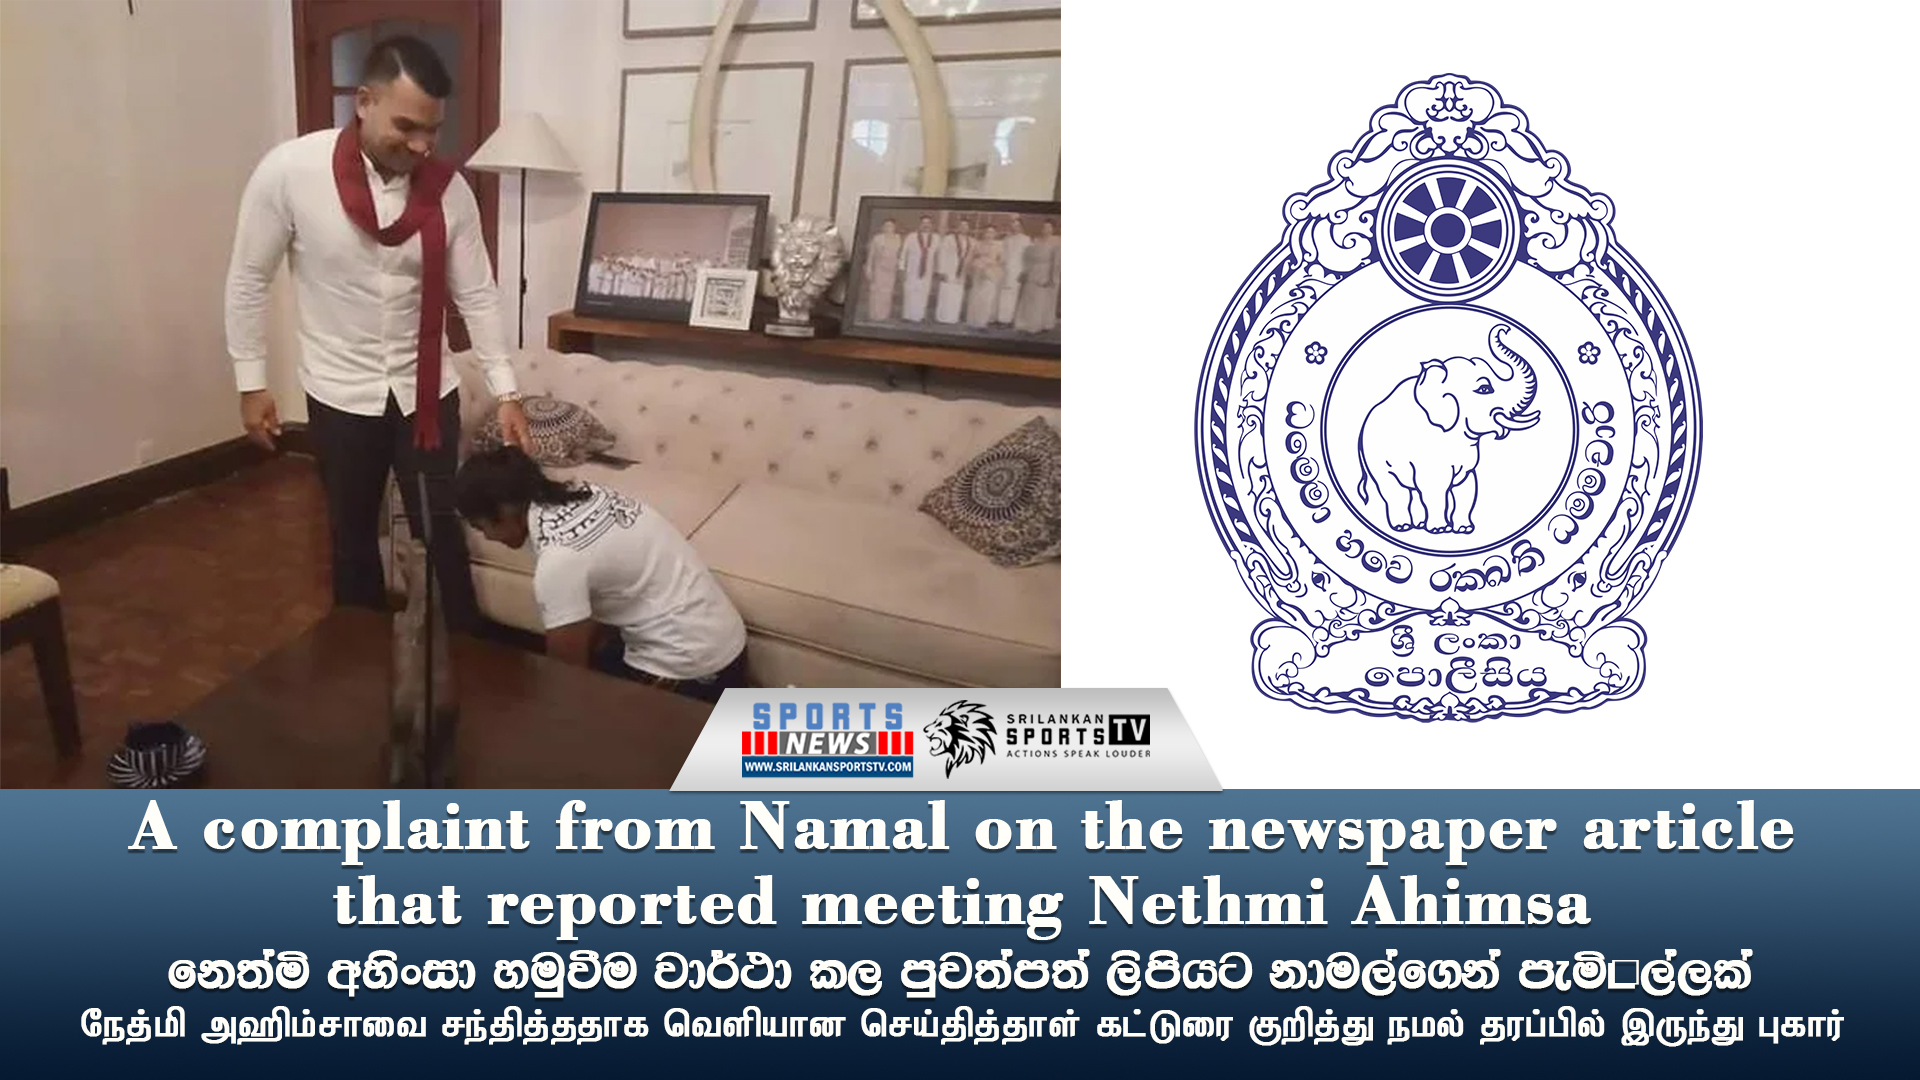 A complaint from Namal on the newspaper article that reported meeting Nethmi Ahimsa